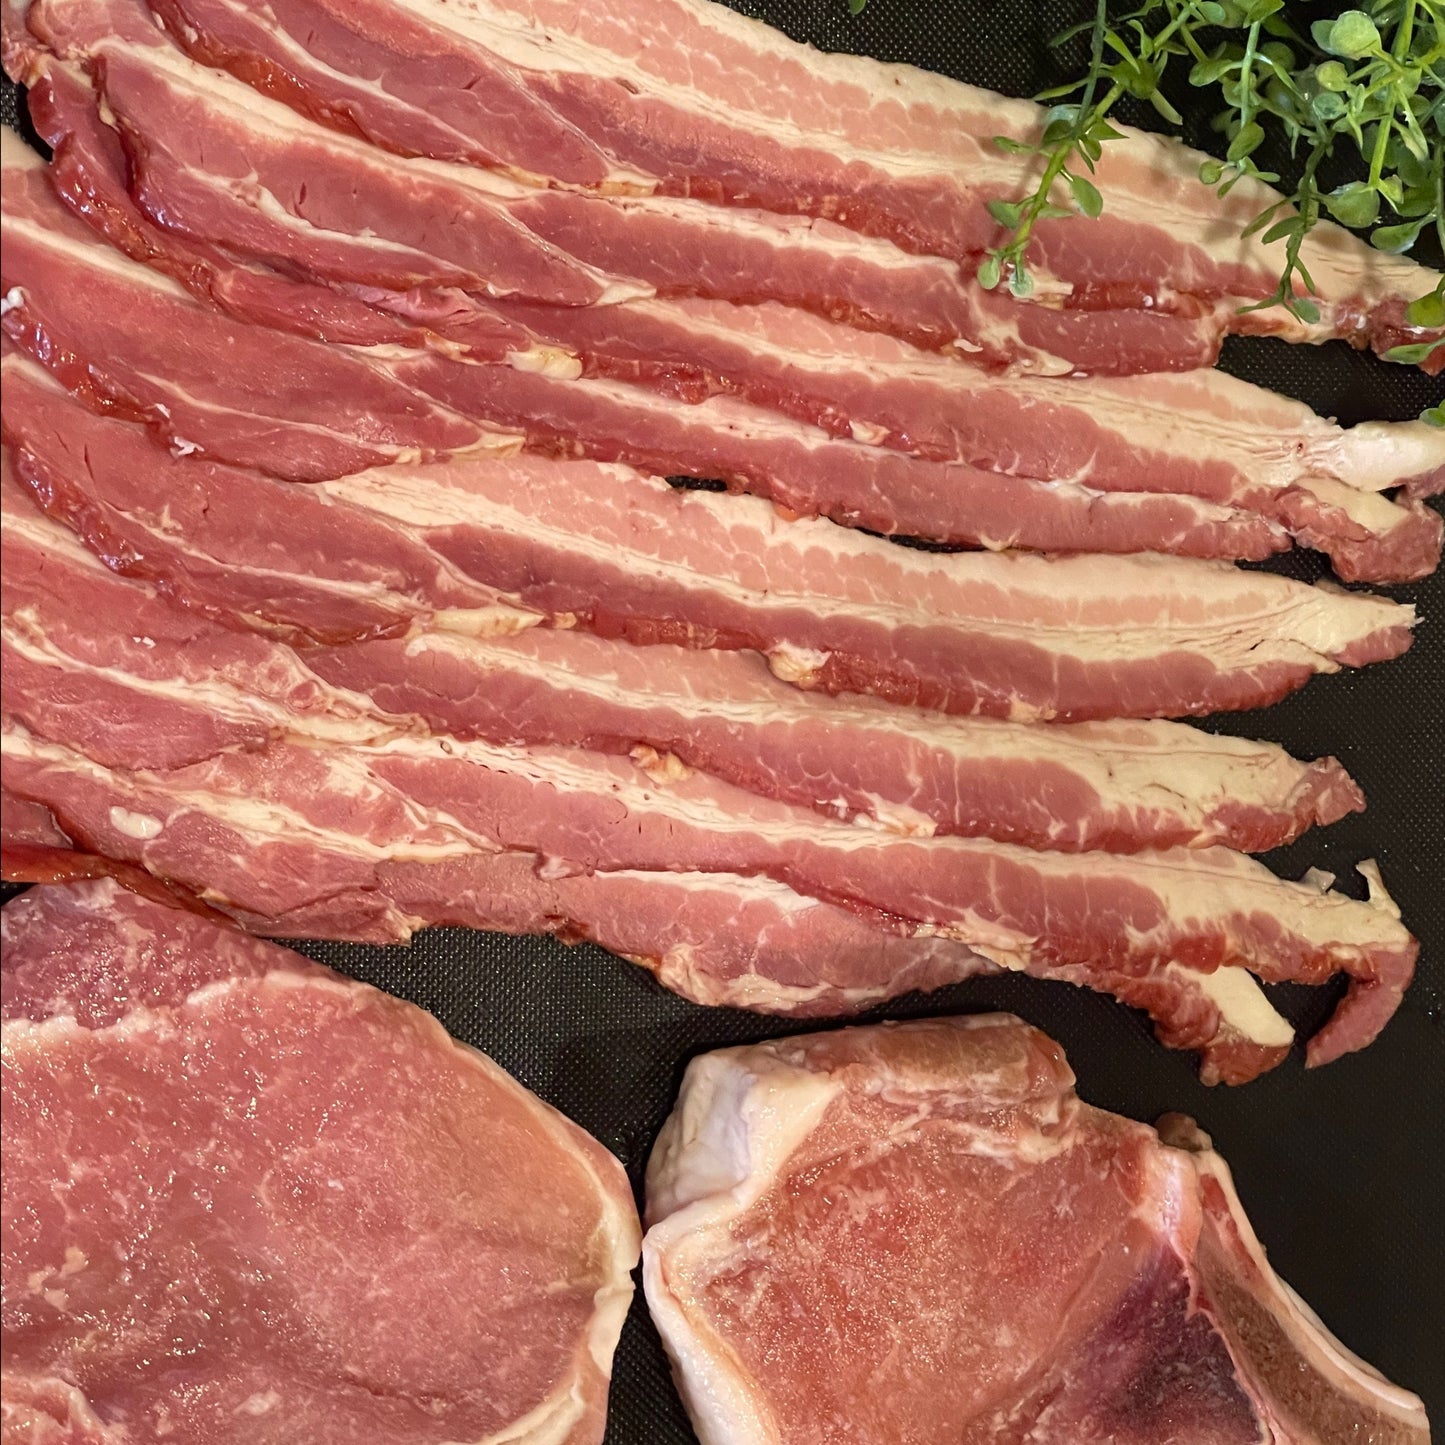 Balance for Bulk Pork with Your Custom or Standard Cutting Instructions